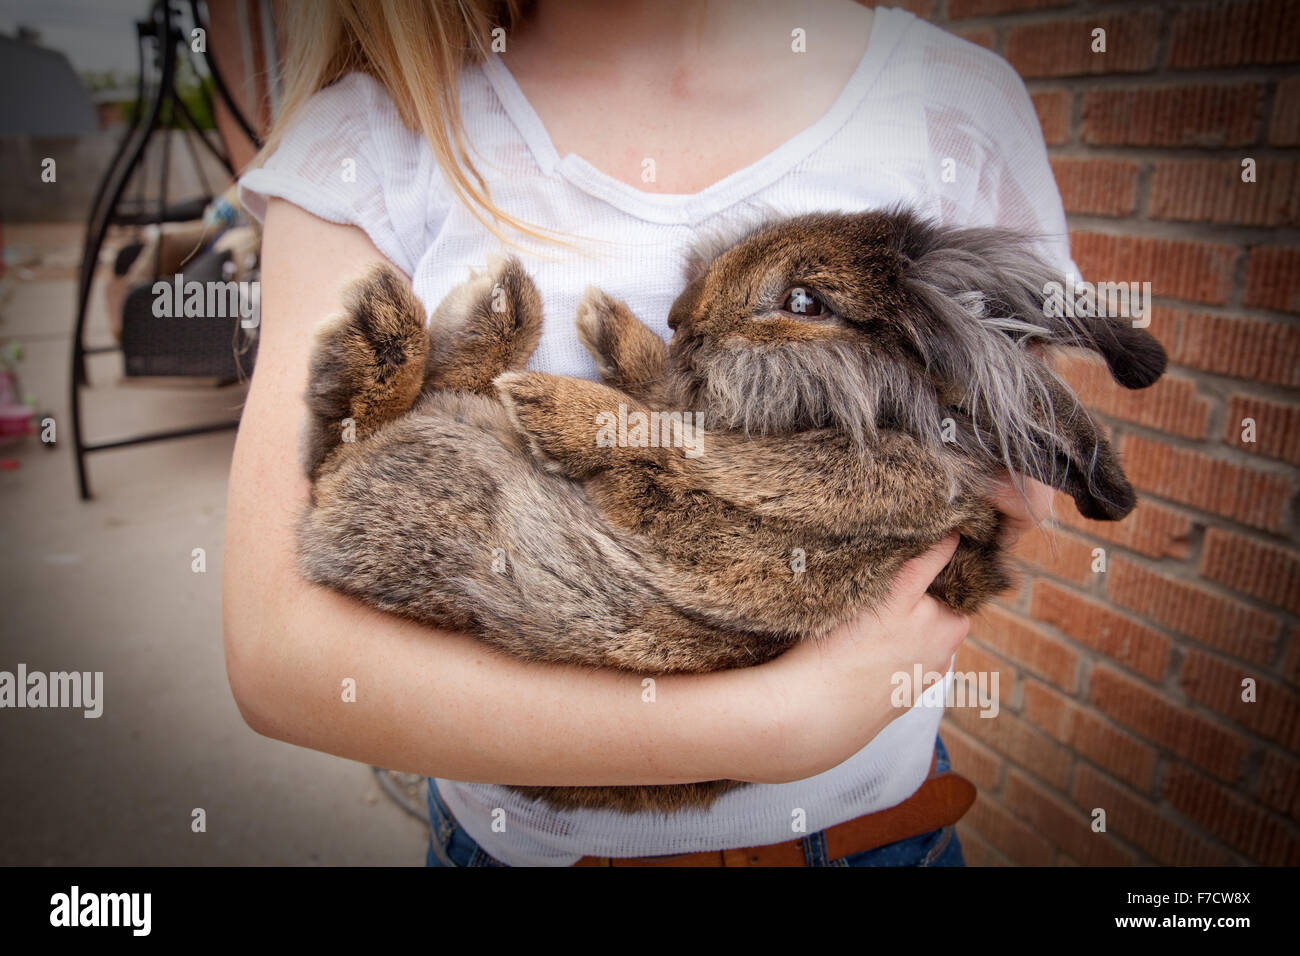 Close up of girl holding a rabbit. Stock Photo